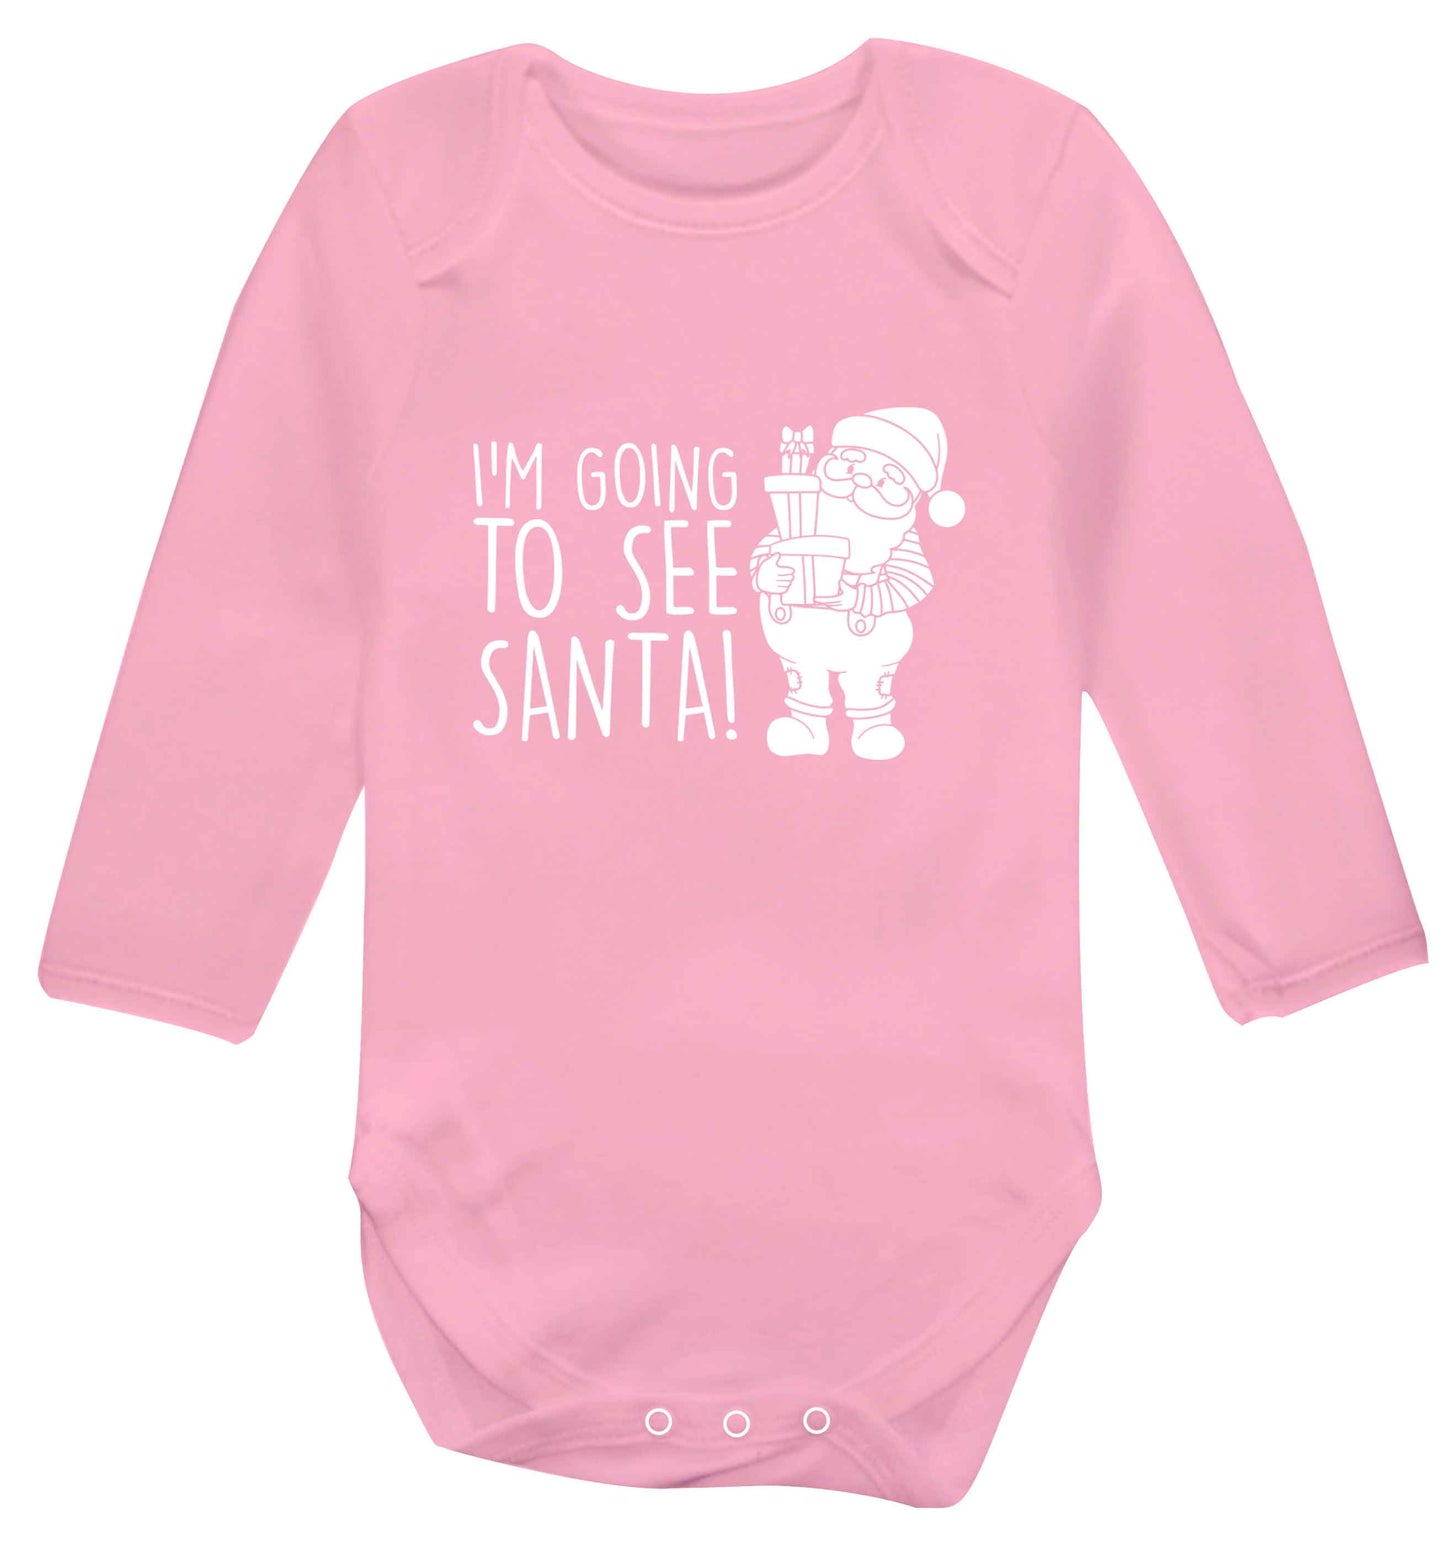 Merry Christmas baby vest long sleeved pale pink 6-12 months